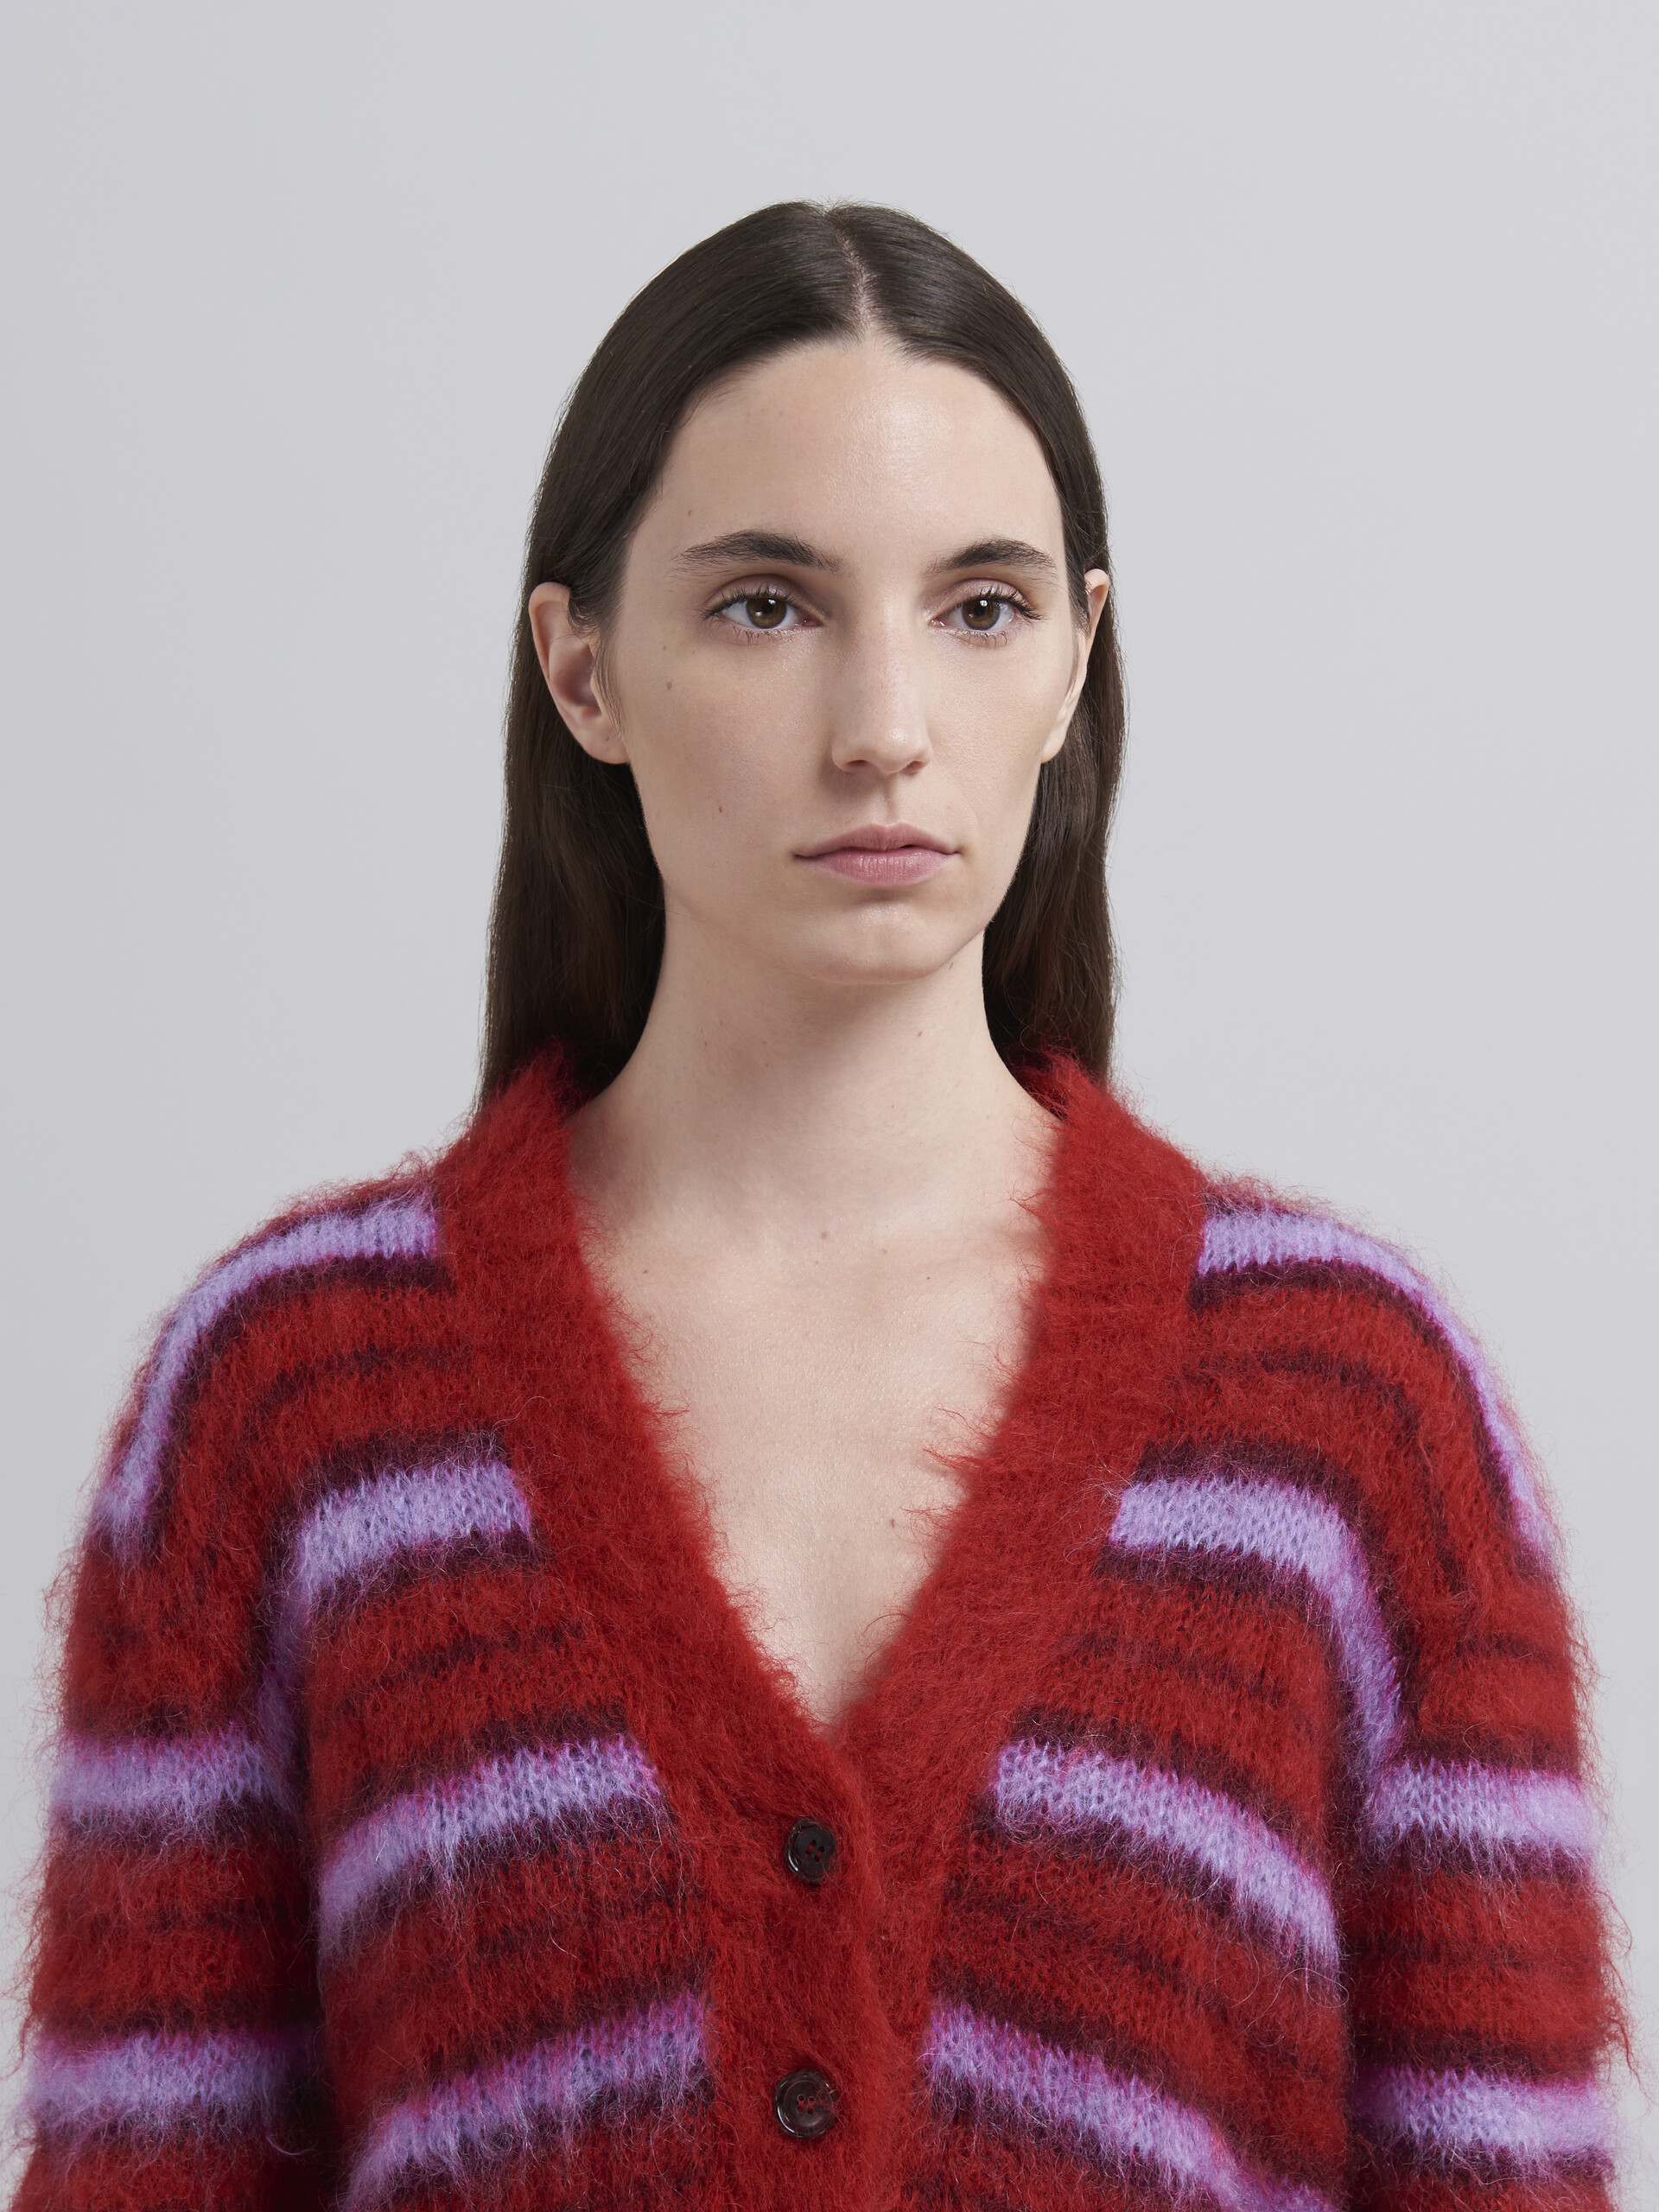 Striped brushed mohair sweater - Pullovers - Image 4